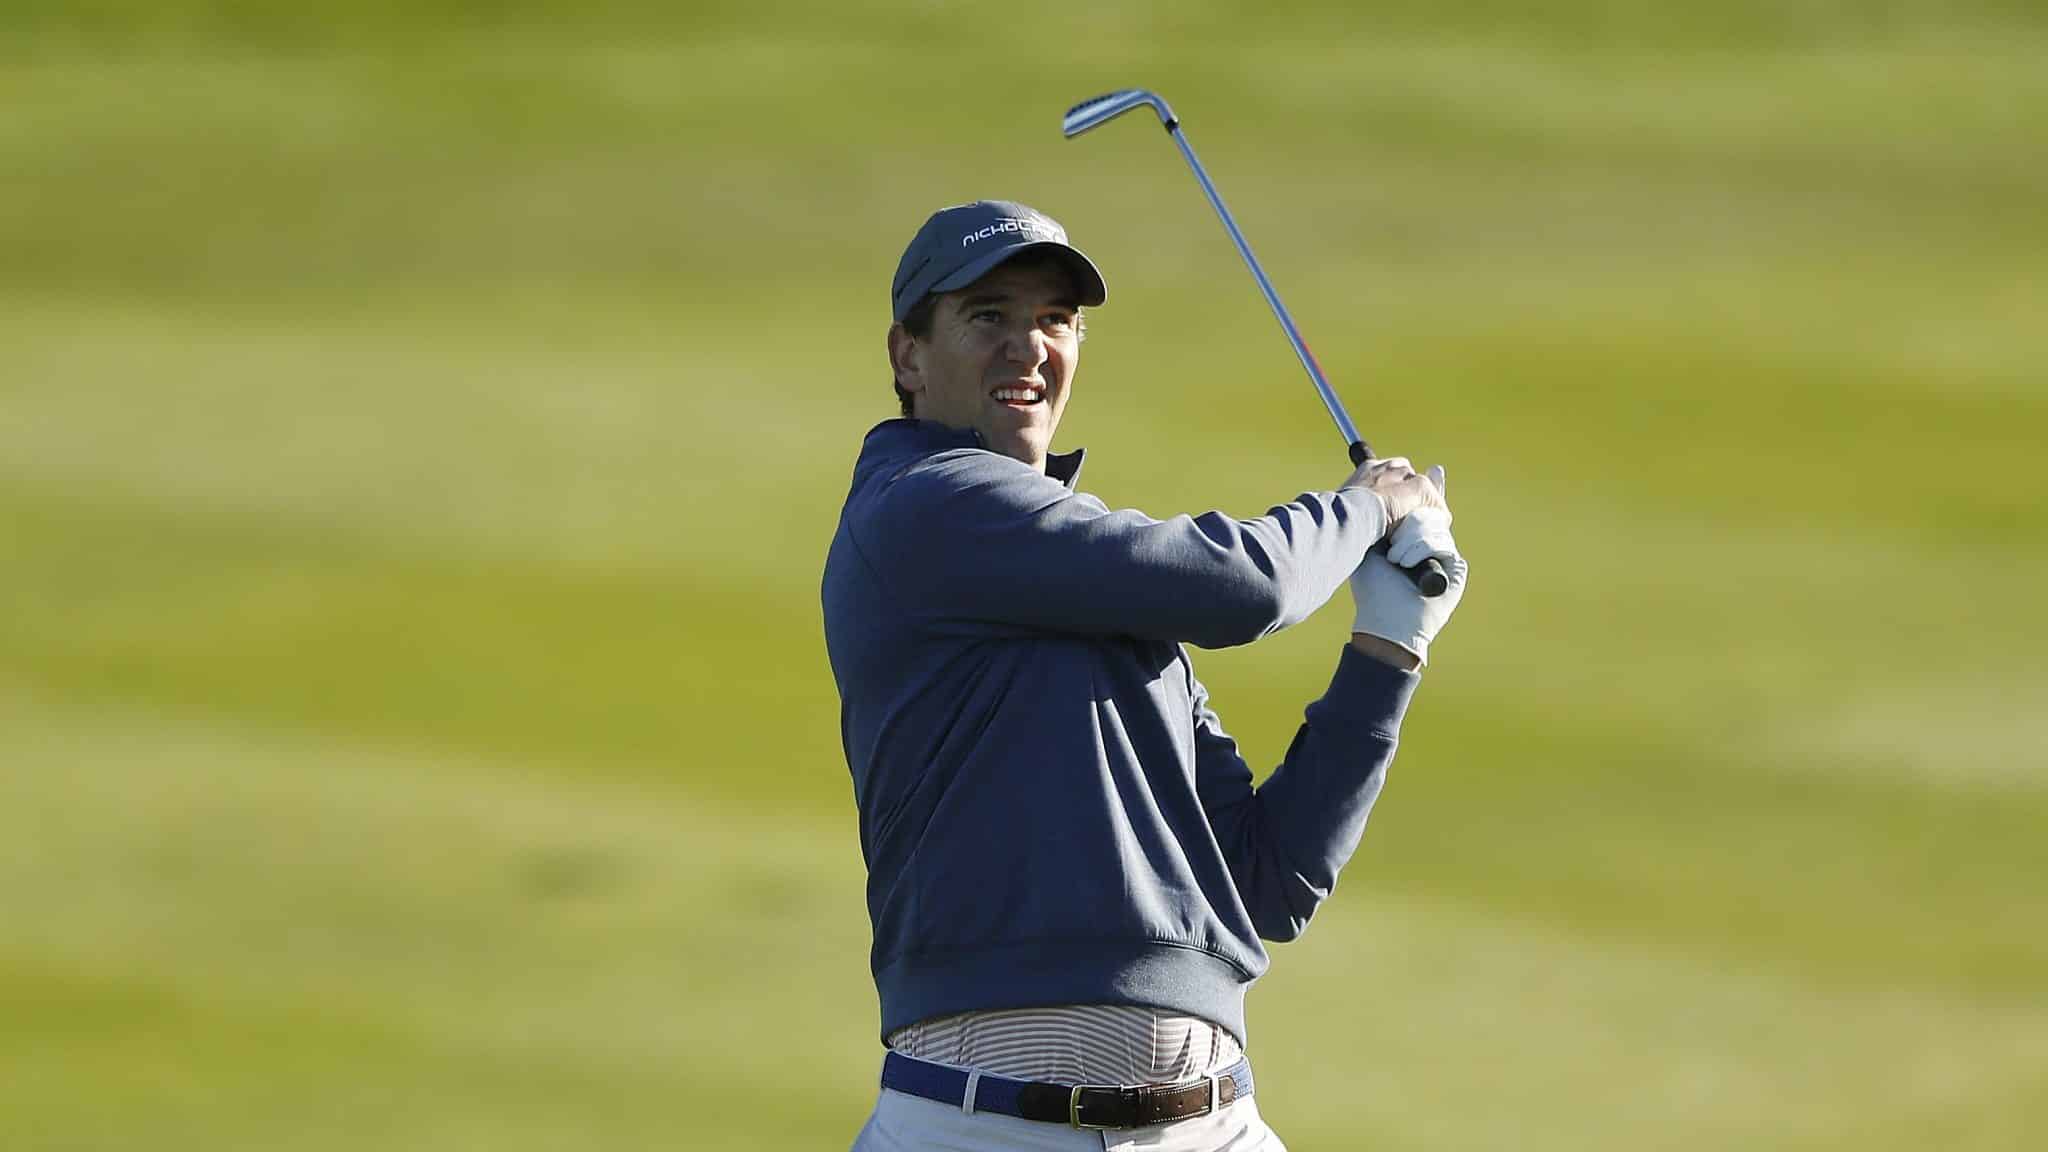 PEBBLE BEACH, CALIFORNIA - FEBRUARY 06: Former NFL player Eli Manning plays a shot on the second hole during the during the first round of the AT&T Pebble Beach Pro-Am at Spyglass Hill Golf Course on February 06, 2020 in Pebble Beach, California.